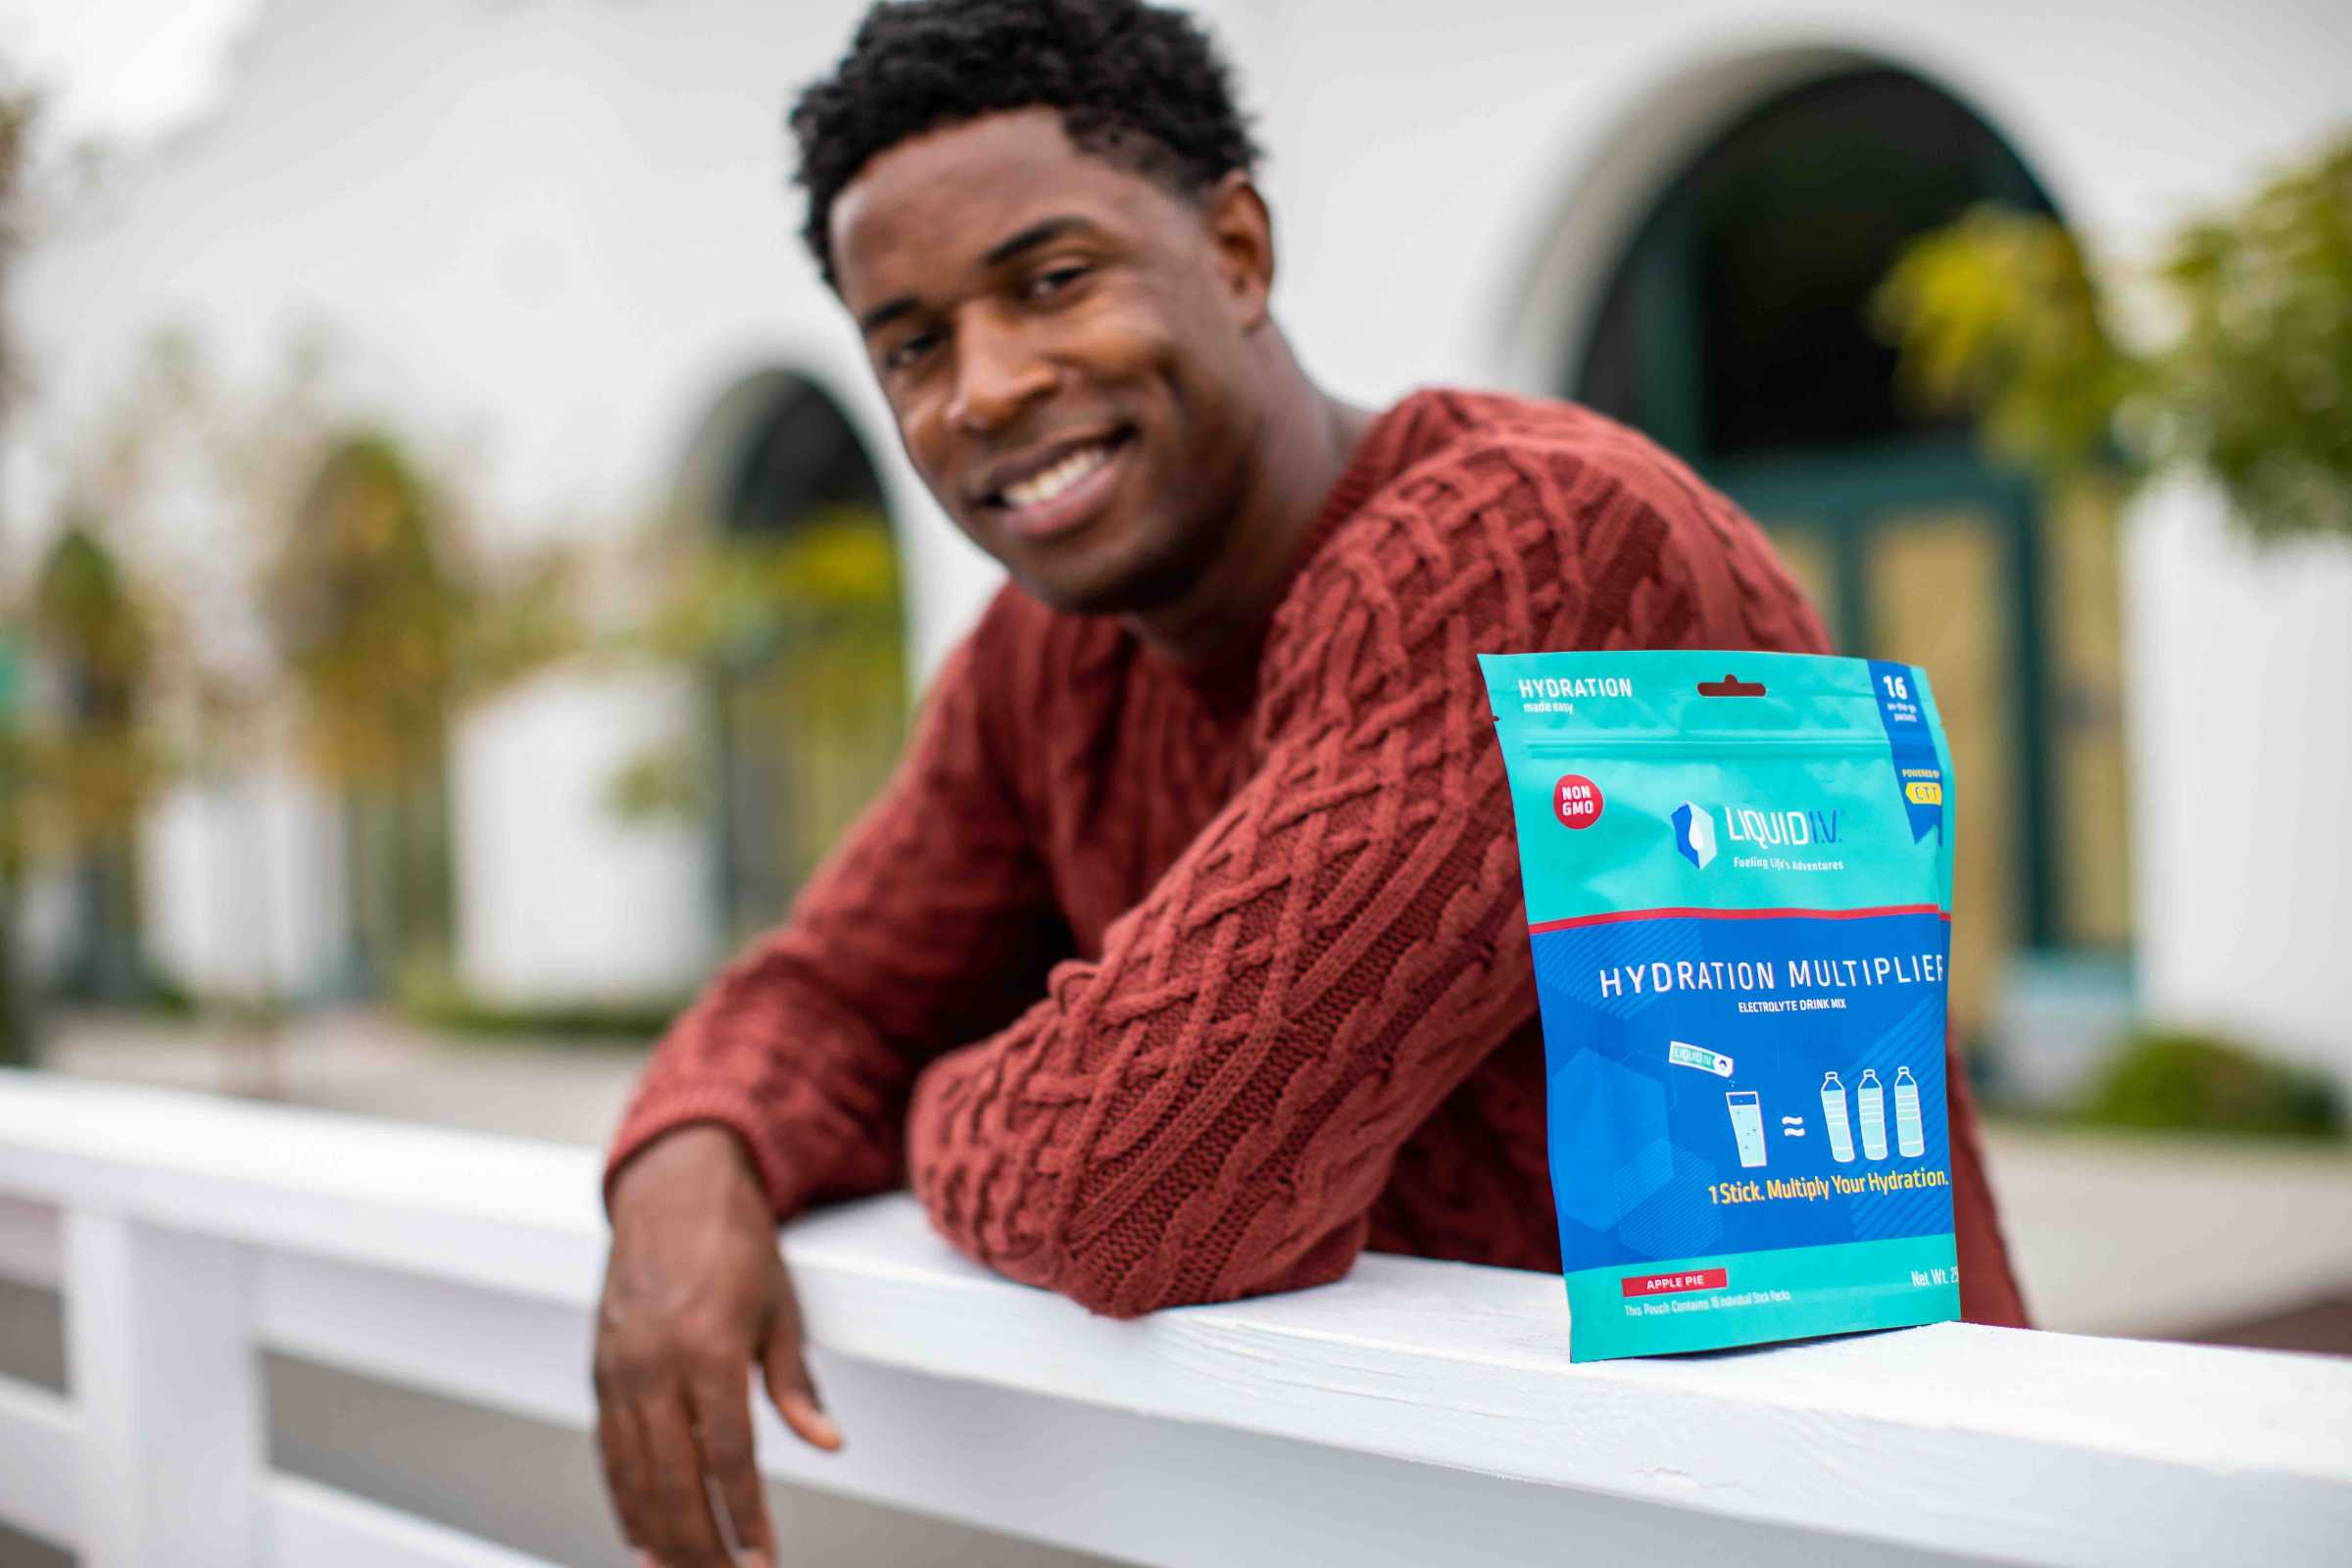 Young man wearing a red sweater smiles while posing with Liquid I.V. Hydration Multiplier.